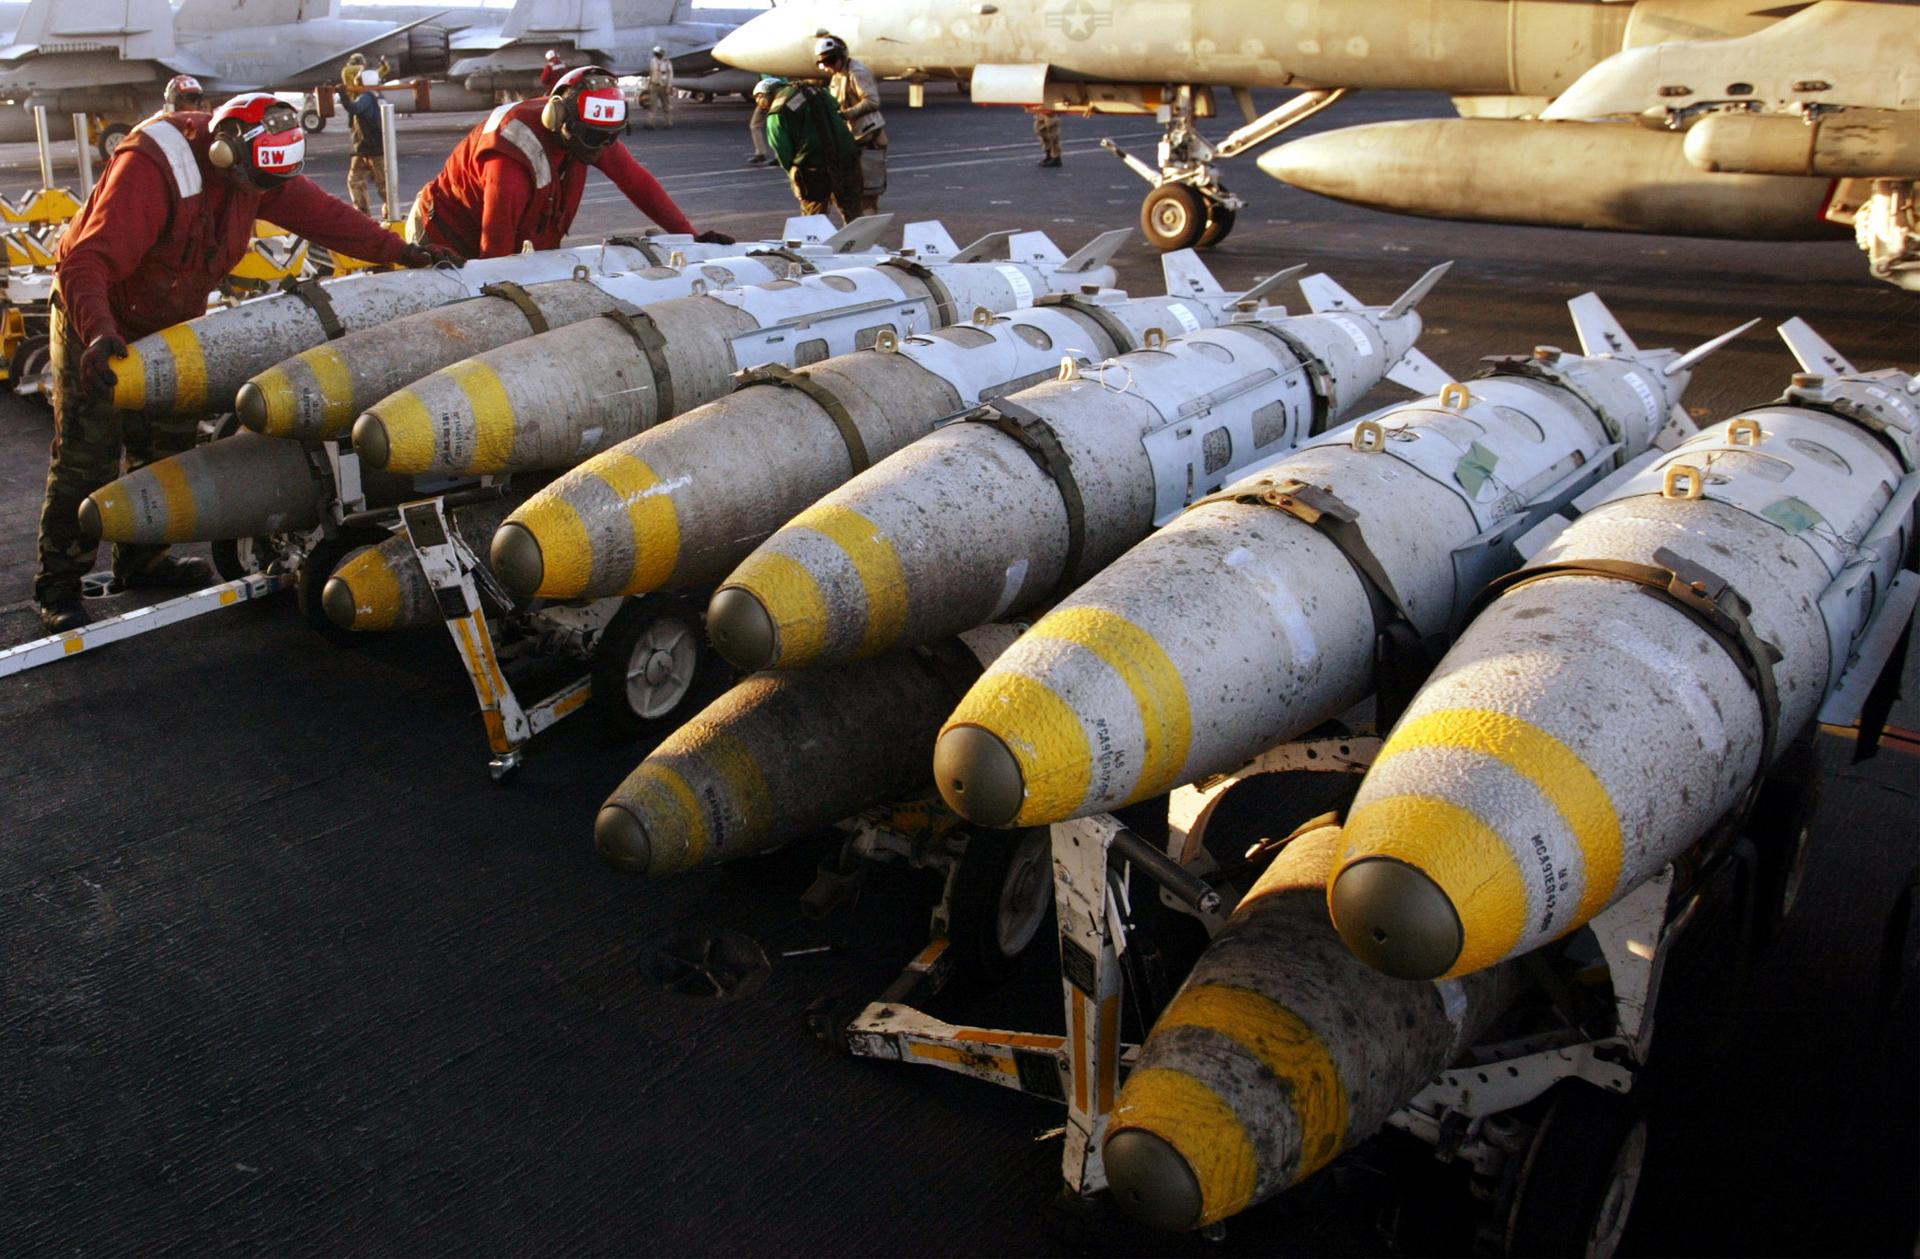 Aviation ordinancemen organize 1000 pound MK-83 JDAM (Joint Direct Attack Munition) bombs on their racks on the flight deck of the USS Kitty Hawk aircraft carrier in this archival photo taken in the northern Persian Gulf March 18, 2003. 